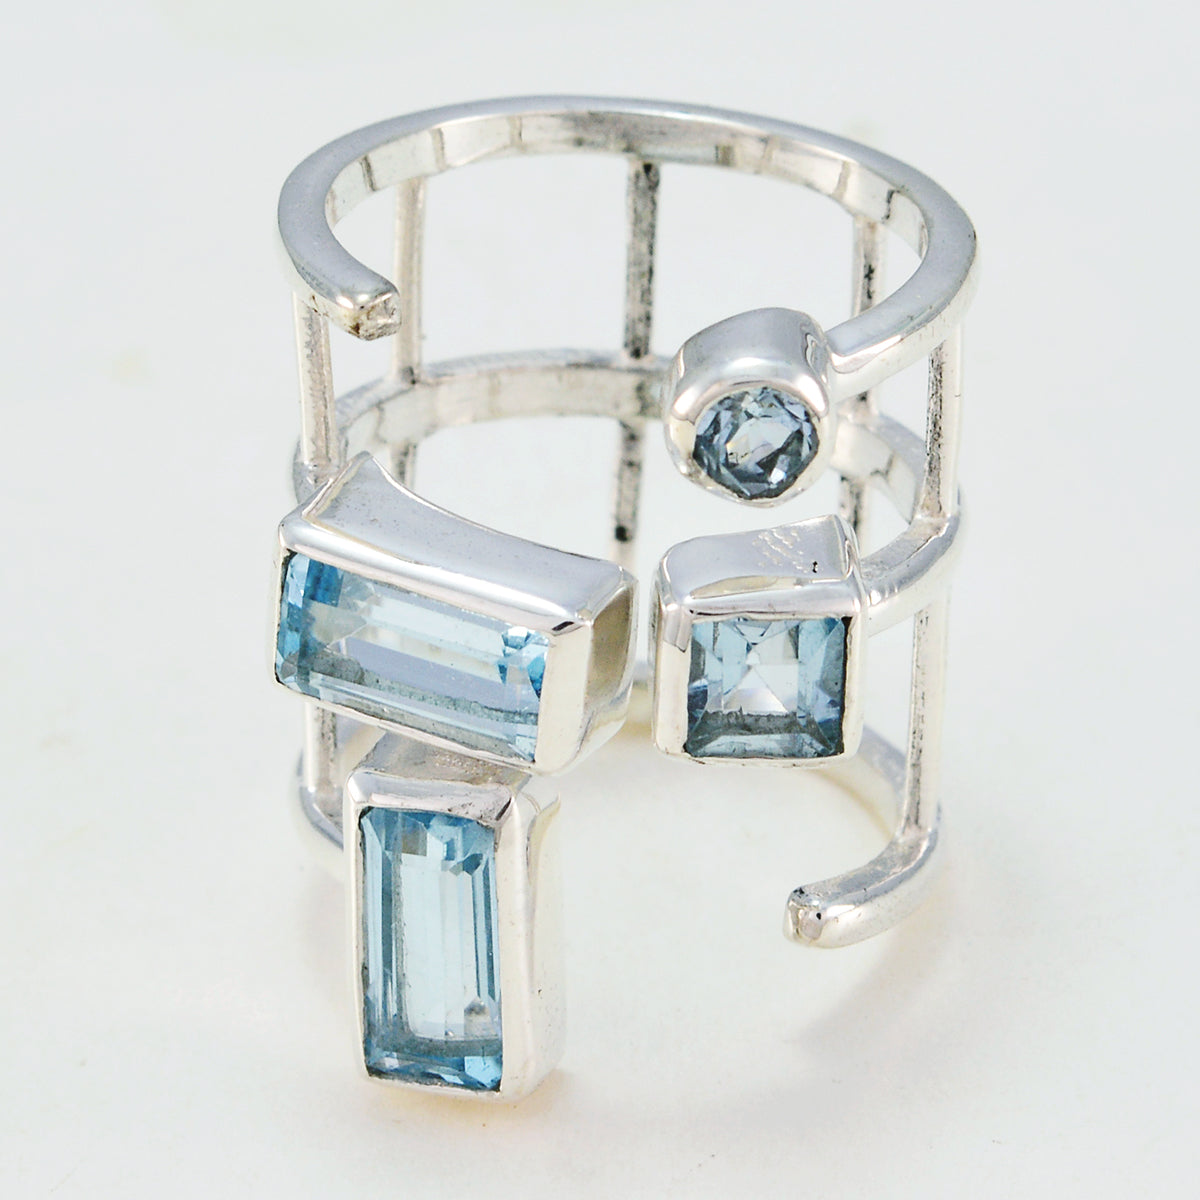 Delicate Gemstones Blue Topaz Solid Silver Rings Large Jewelry Armoire